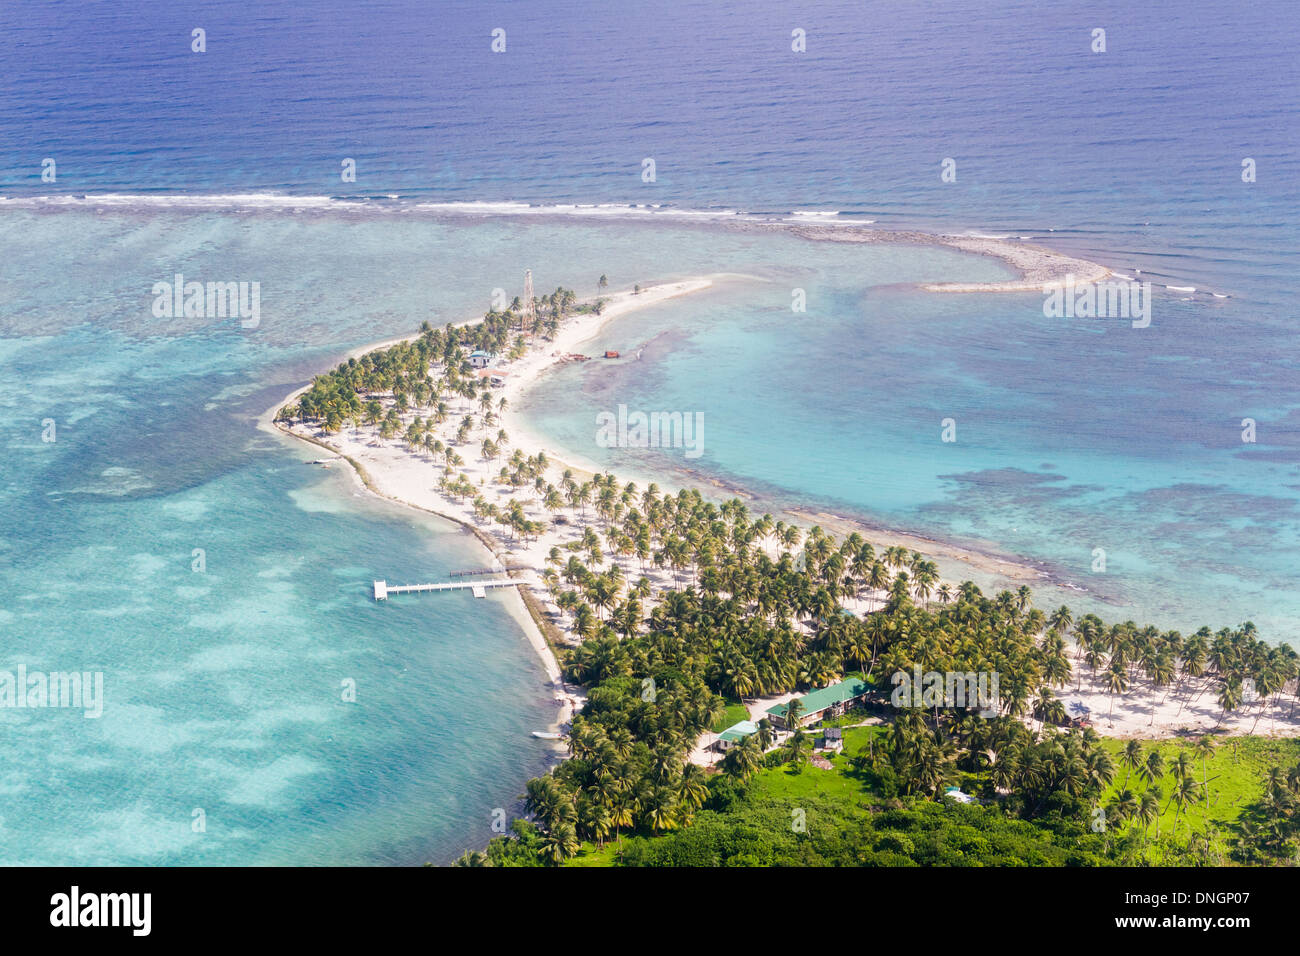 aerial view of the barrier reef of the coast of San Pedro, Belize. with ...